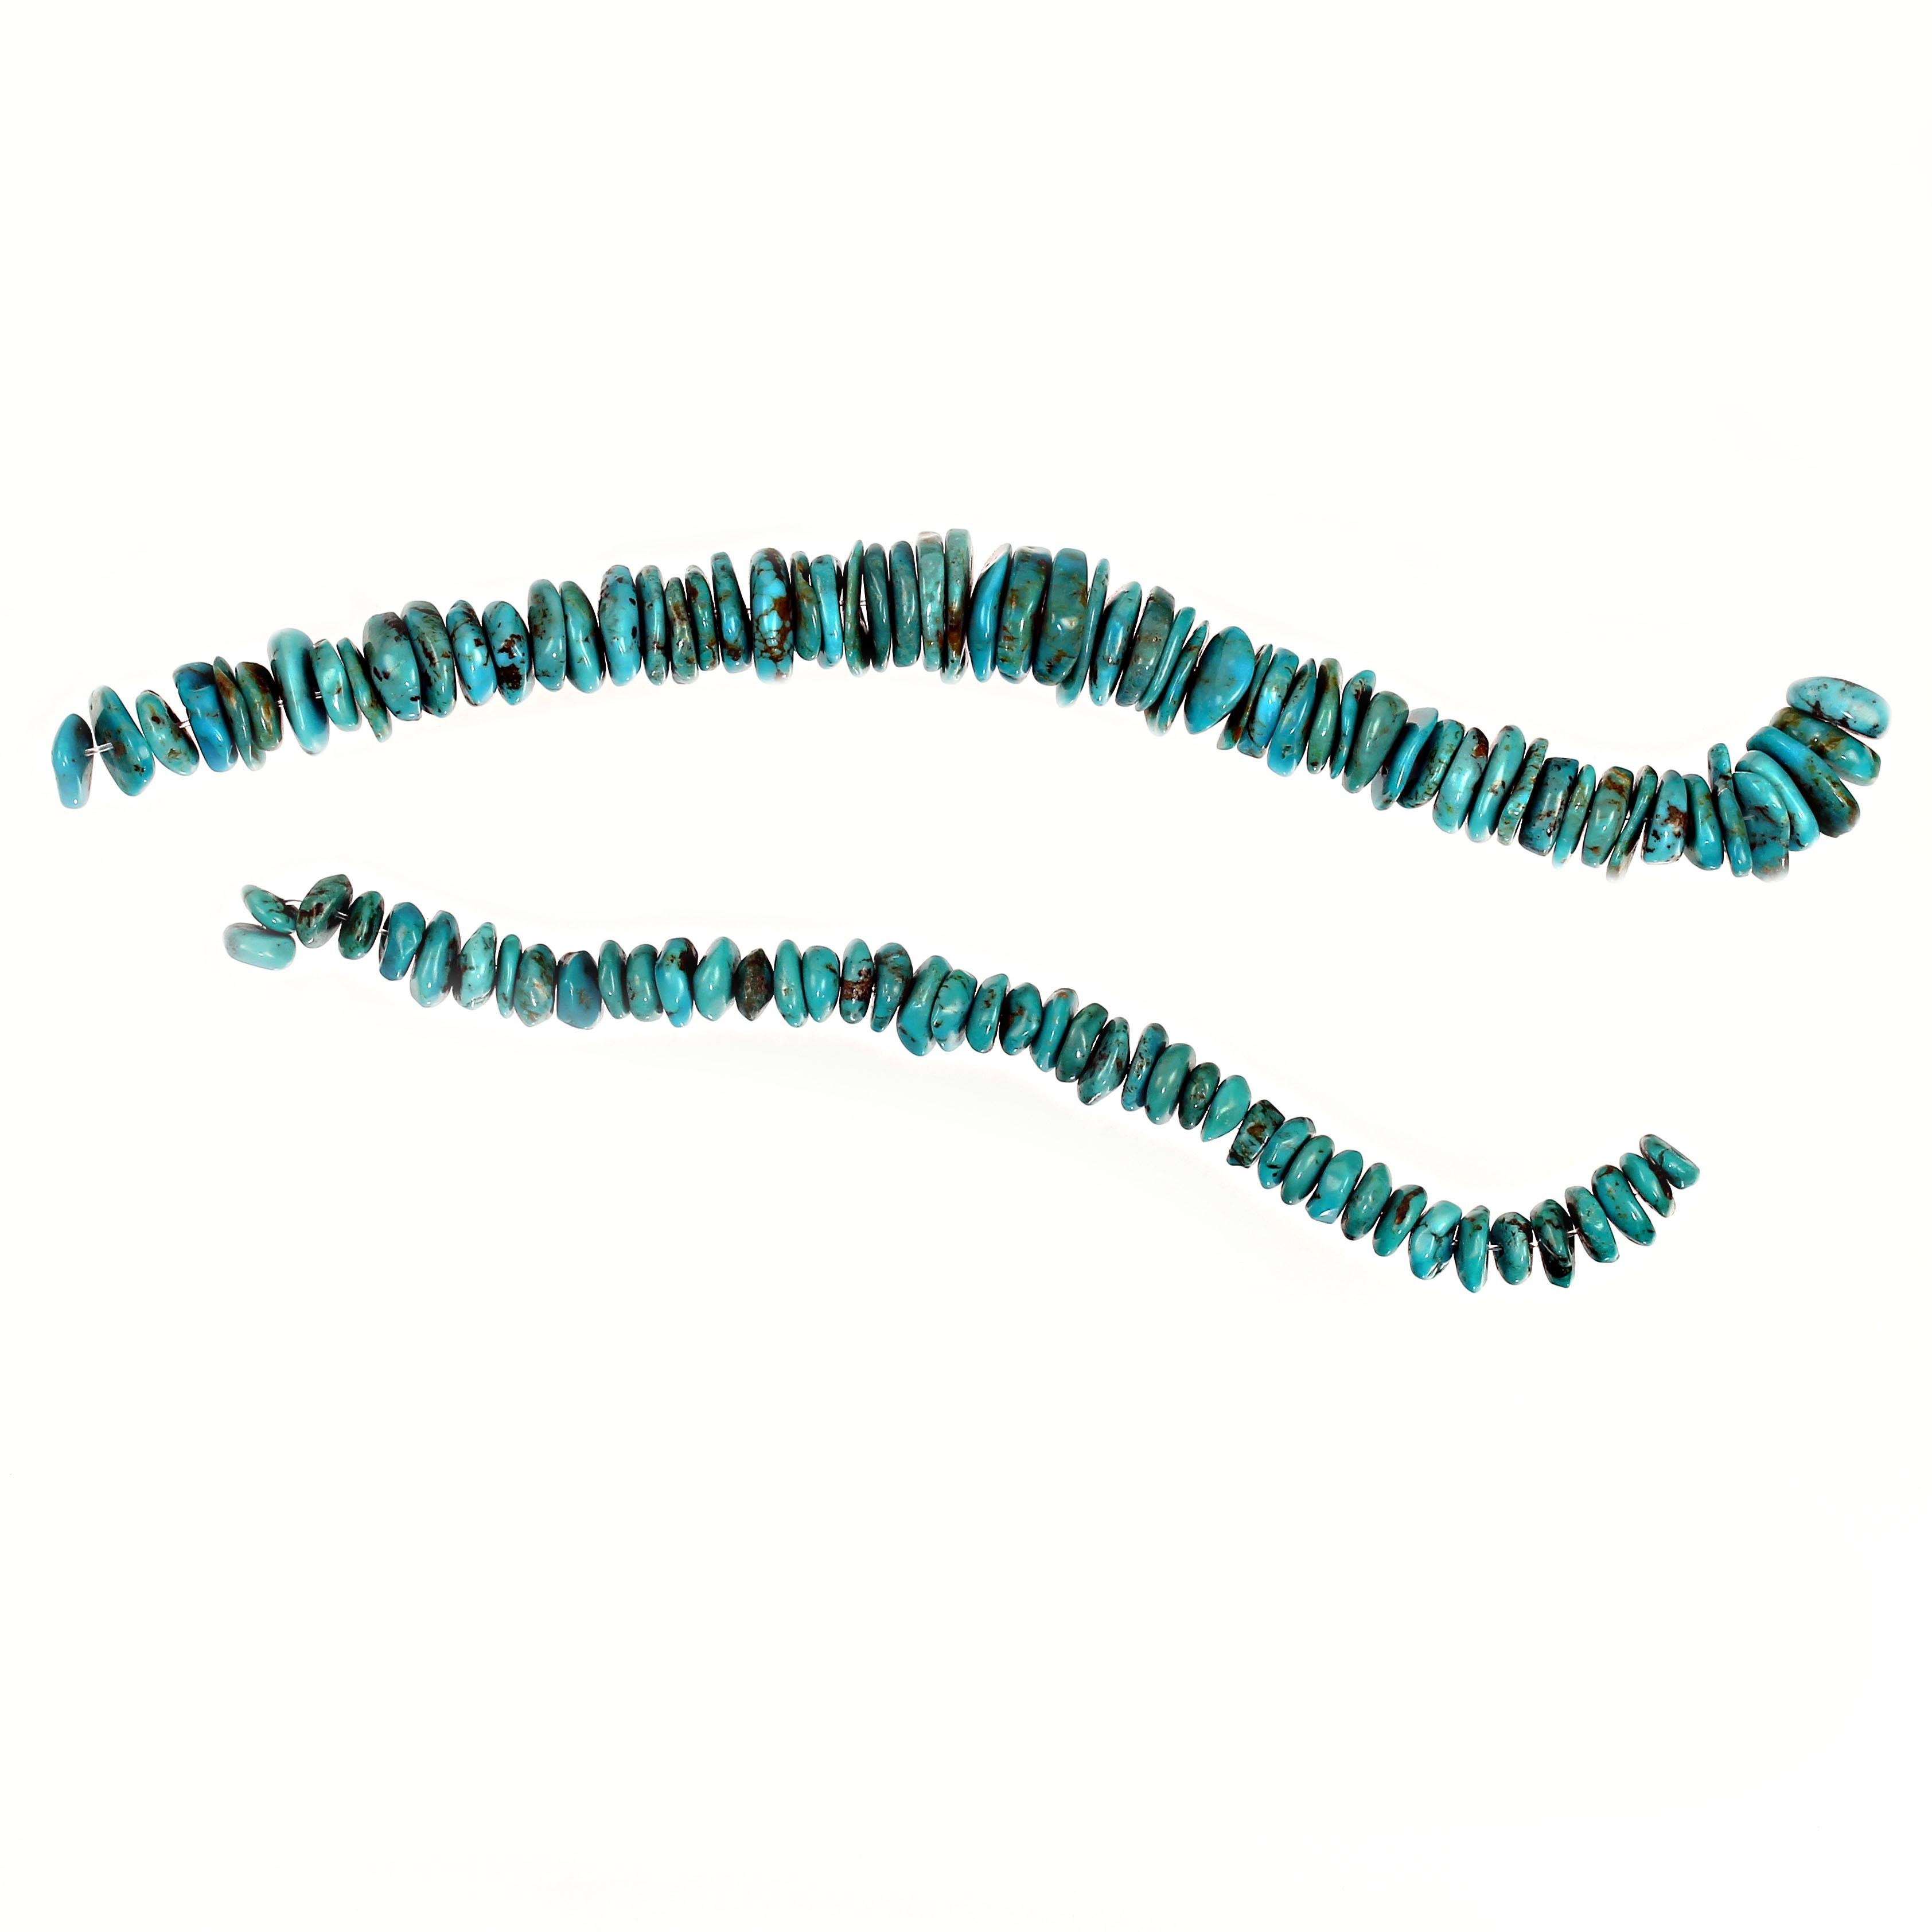 12 Inches of Hubei turquoise slices for jewelry.